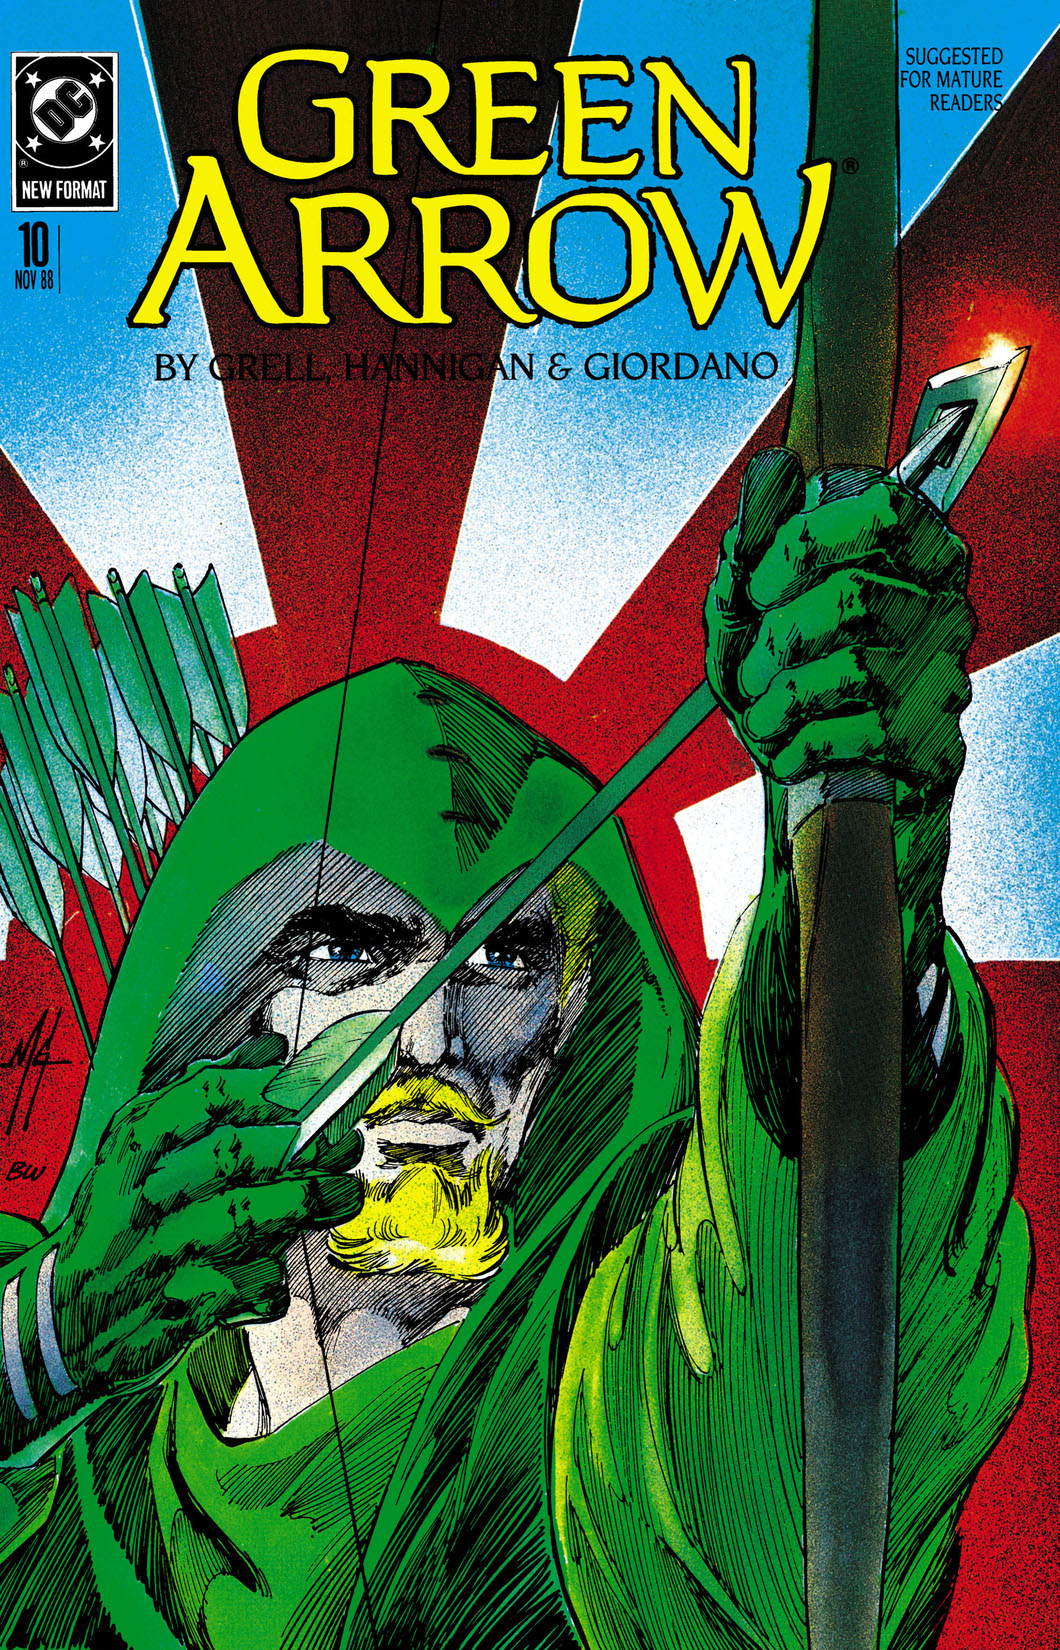 Green Arrow (1987-) #10 preview images